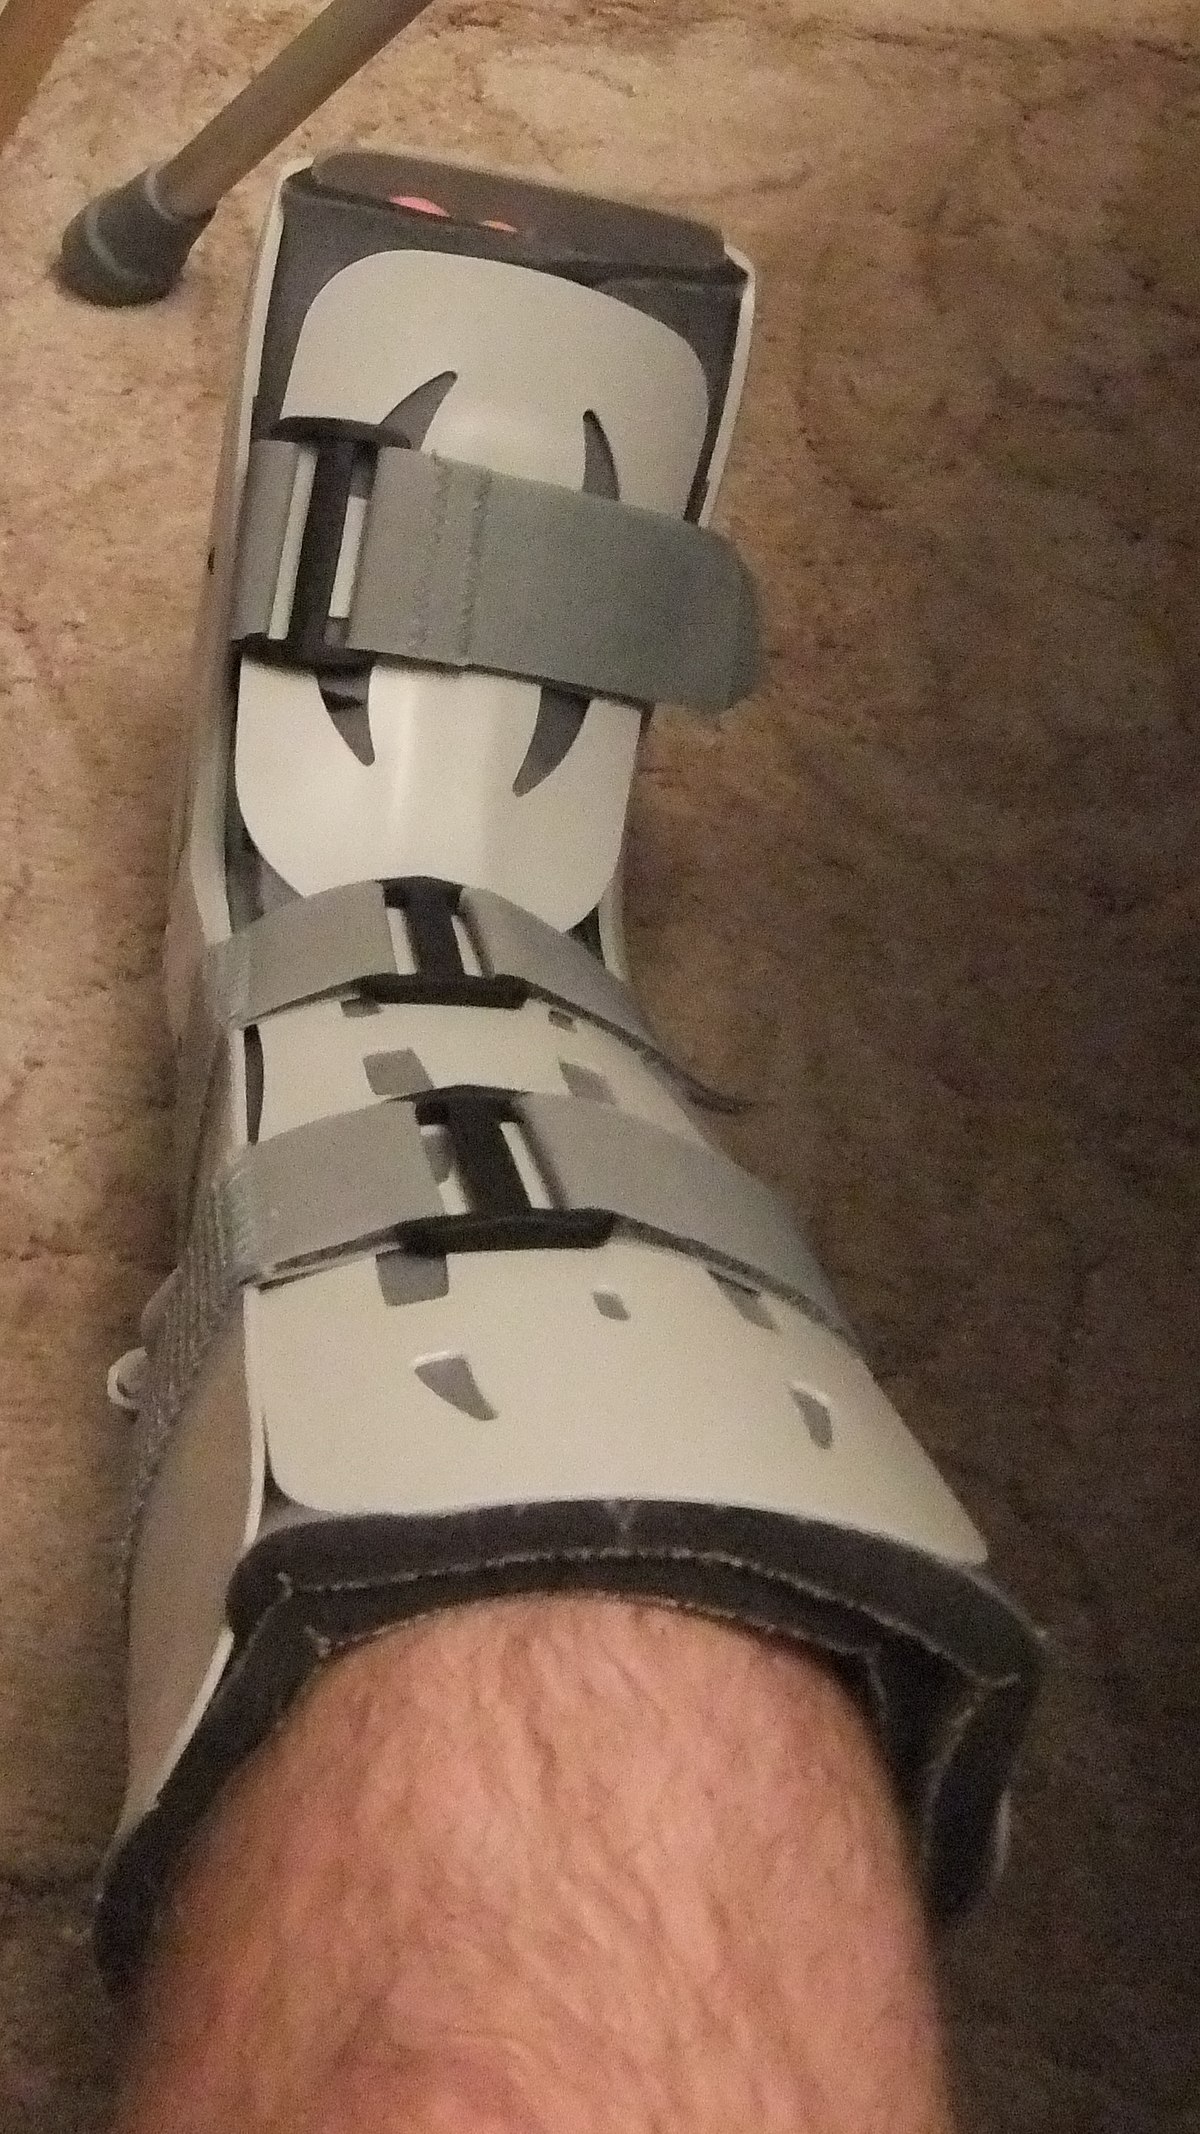 How 2 Days In A Fracture Walking Boot Can Help You Decide If You